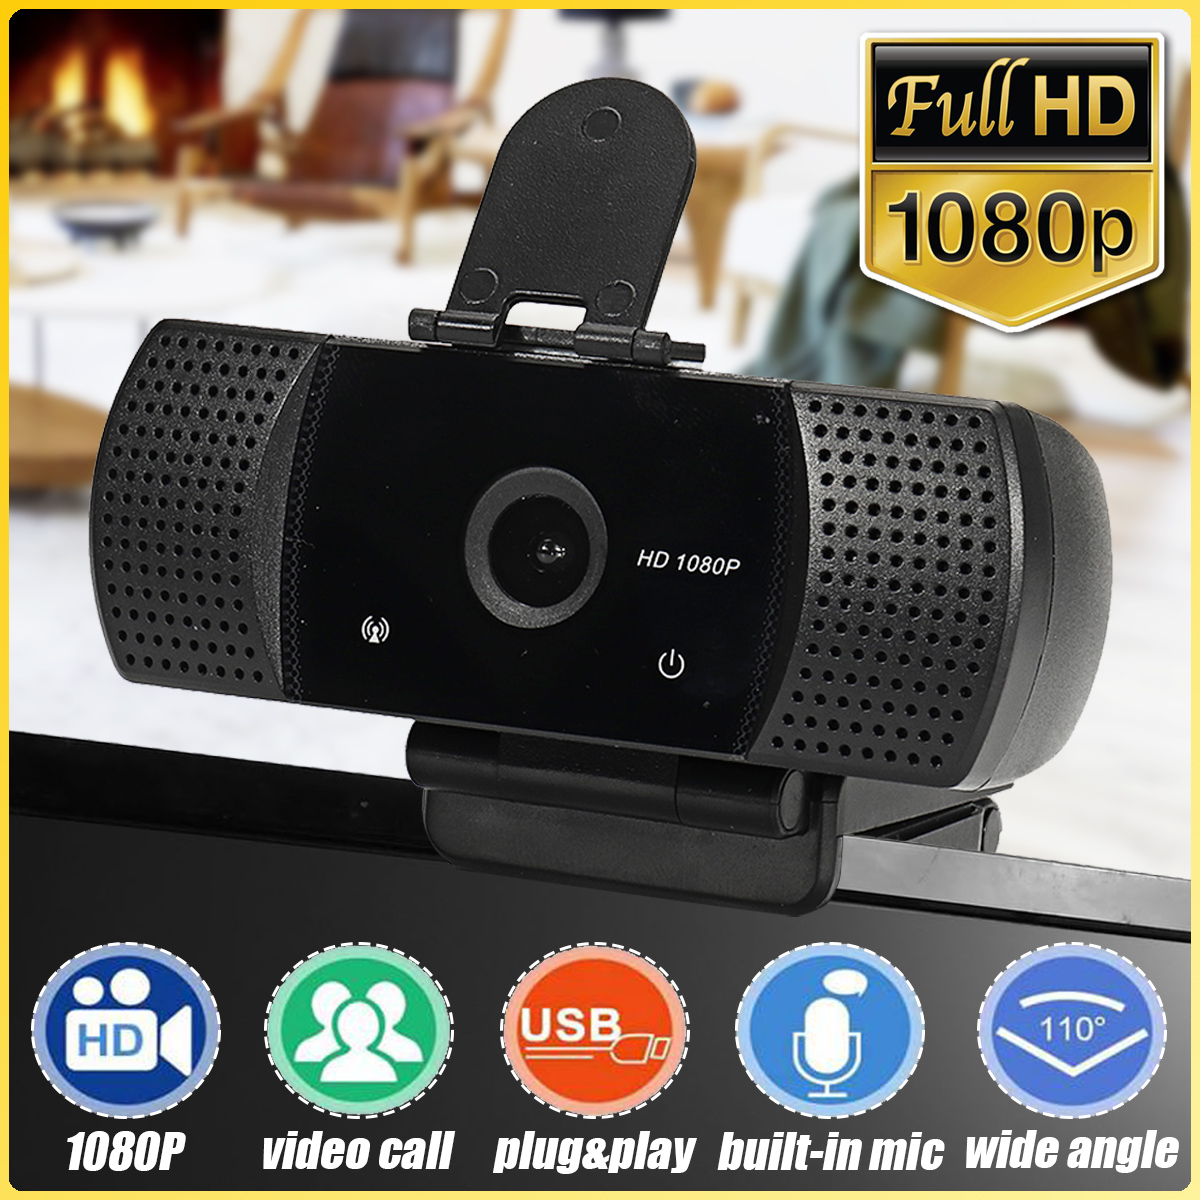 1080P-USB-Webcams-PC-Laptop-Video-Computer-Camera-Built-in-Microphone-Drive-Free-1771465-2